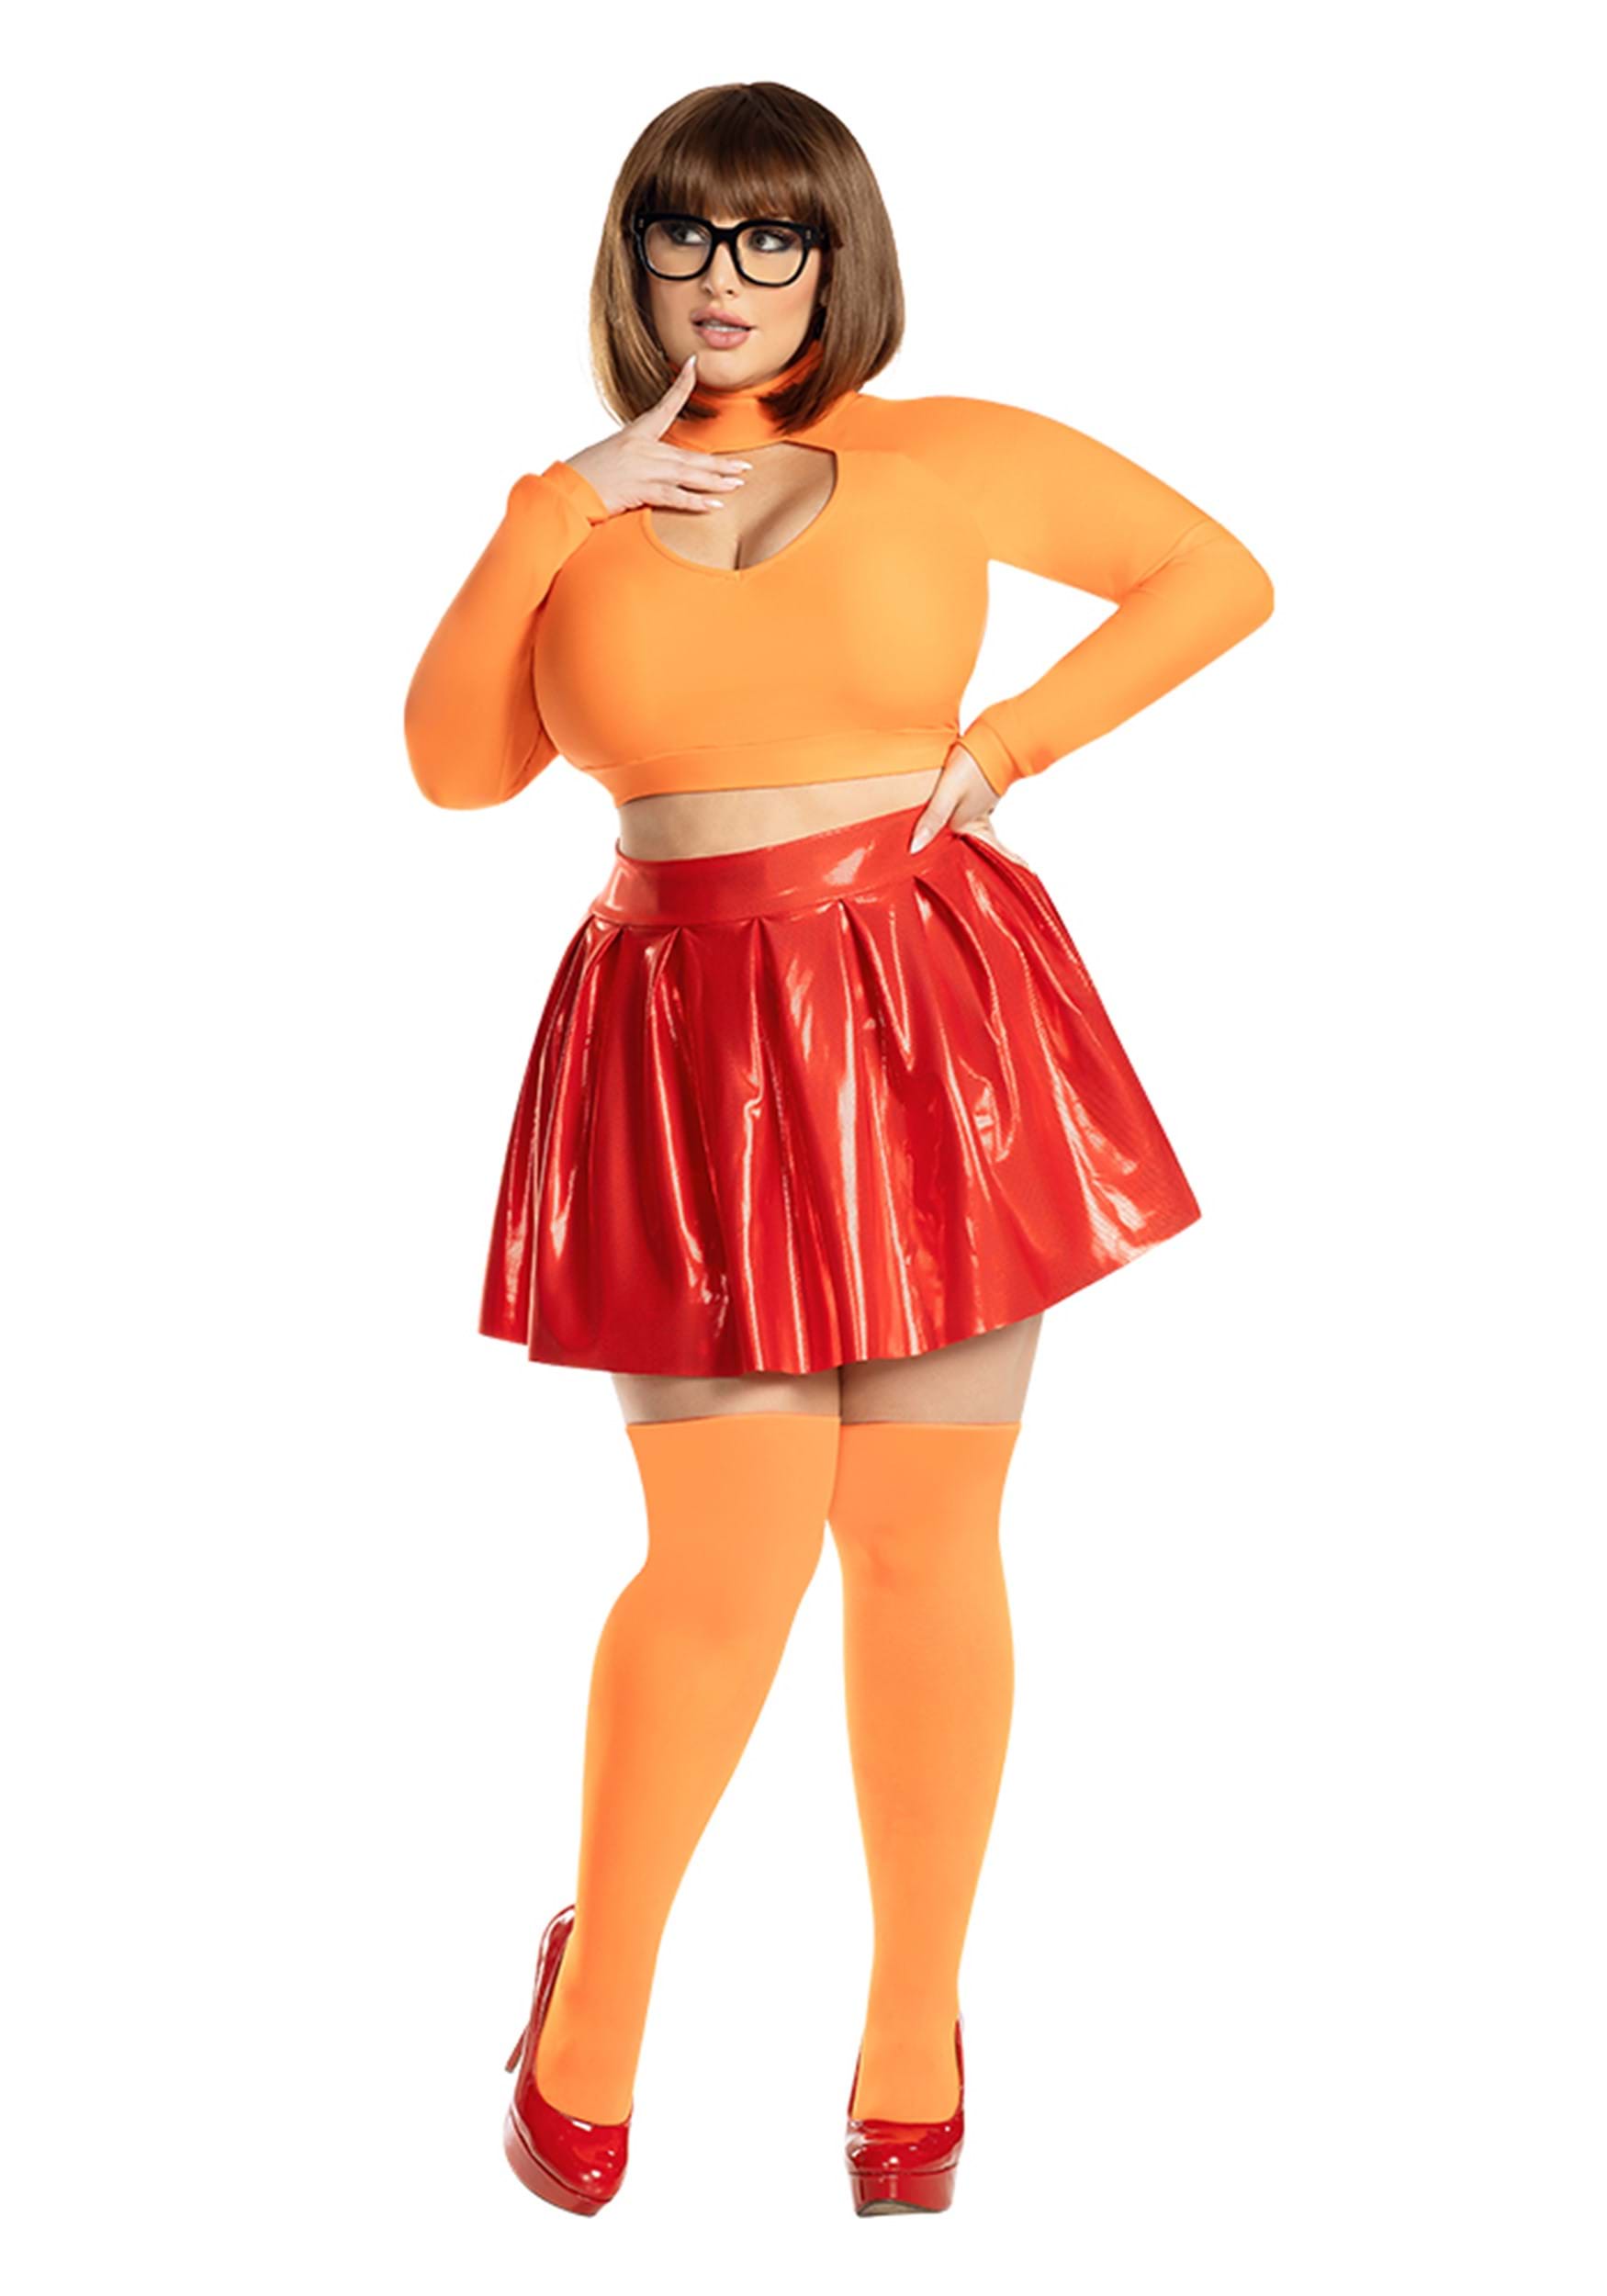 Halloweencostumes.com Work It Out 80's Women's Plus Size Costume